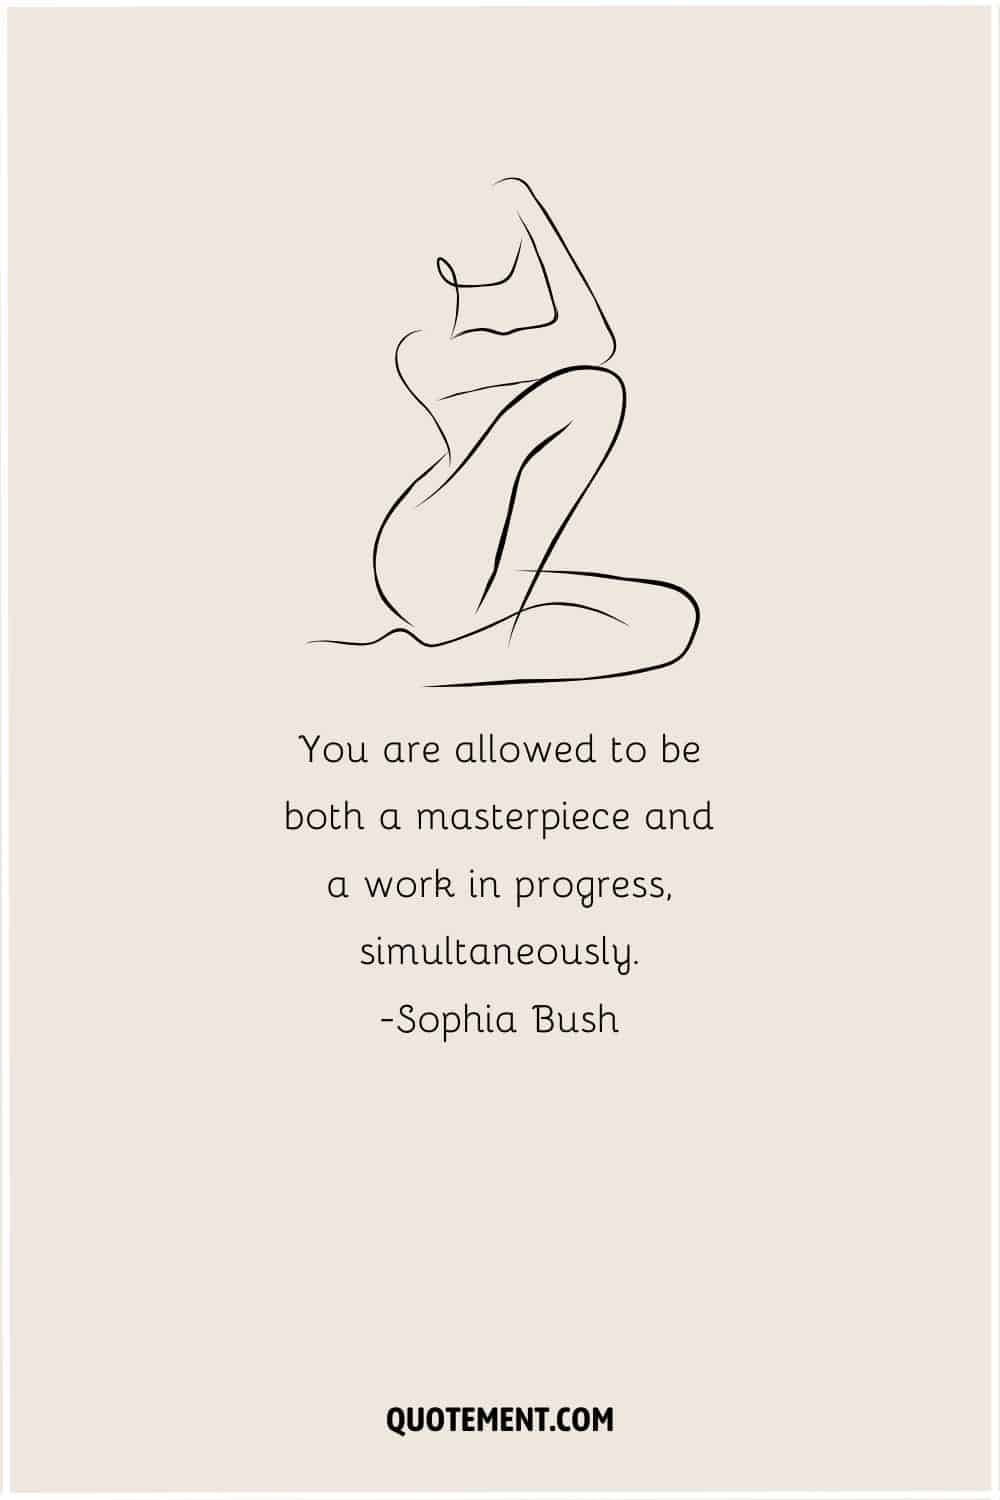 You are allowed to be both a masterpiece and a work in progress, simultaneously